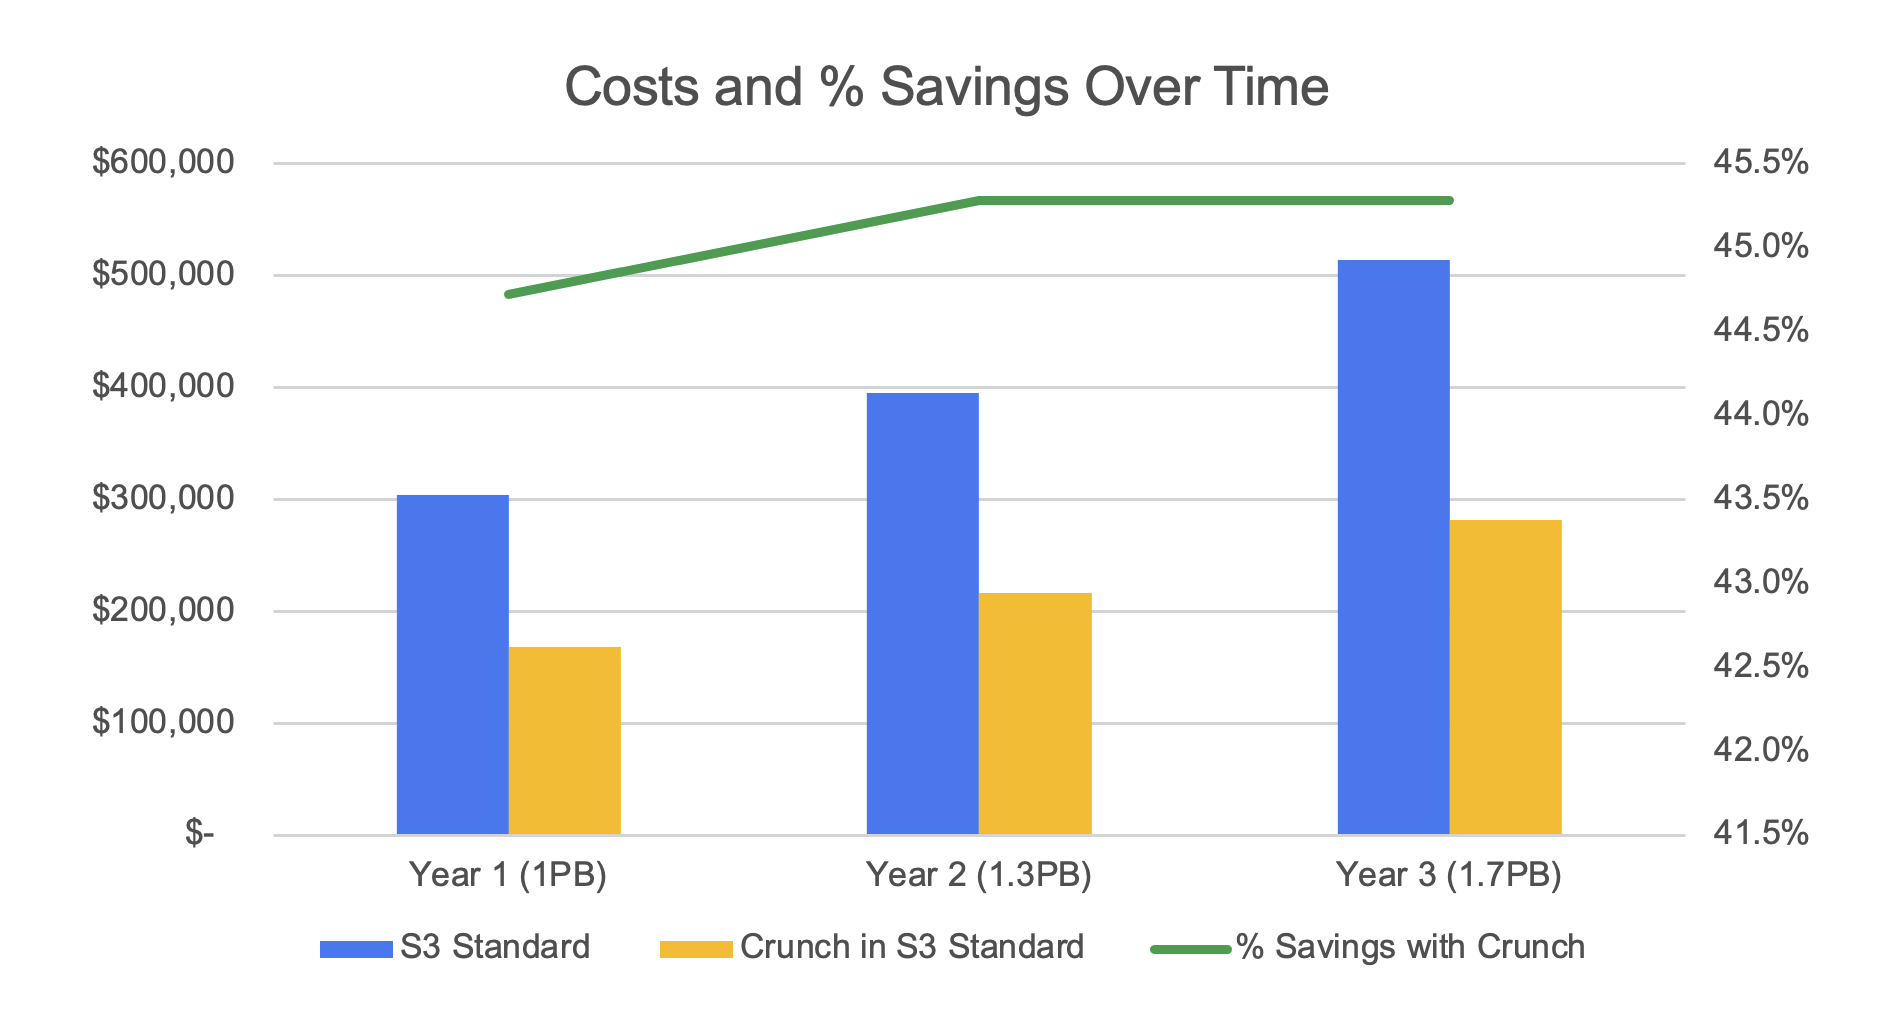 TLDR Costs and % Savings